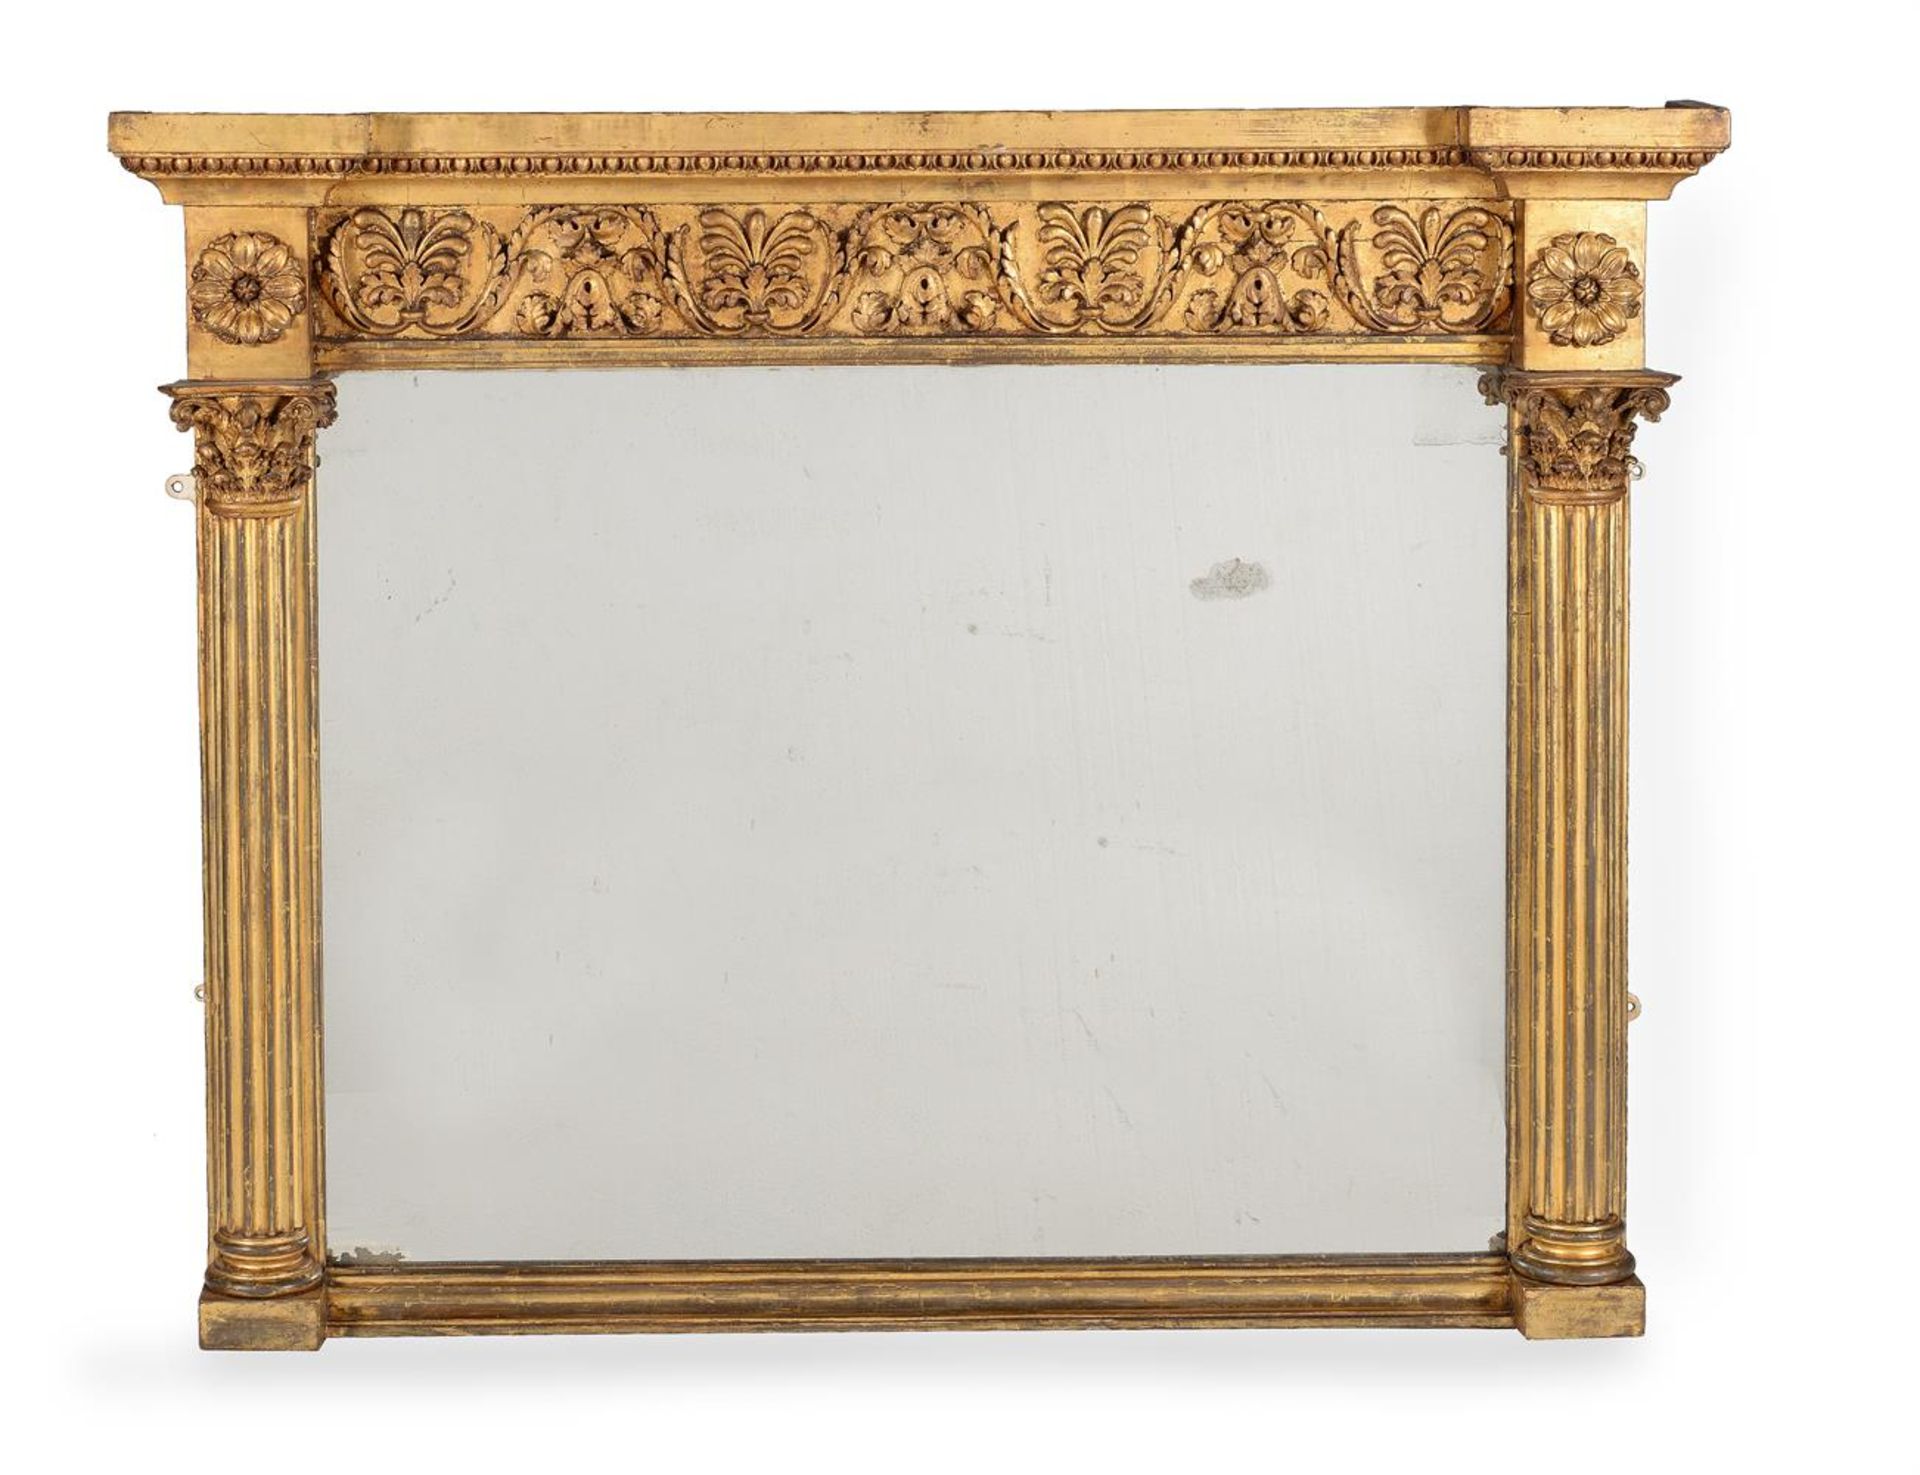 A REGENCY GILTWOOD OVERMANTLE MIRROR, IN CORINTHIAN STYLE, CIRCA 1820